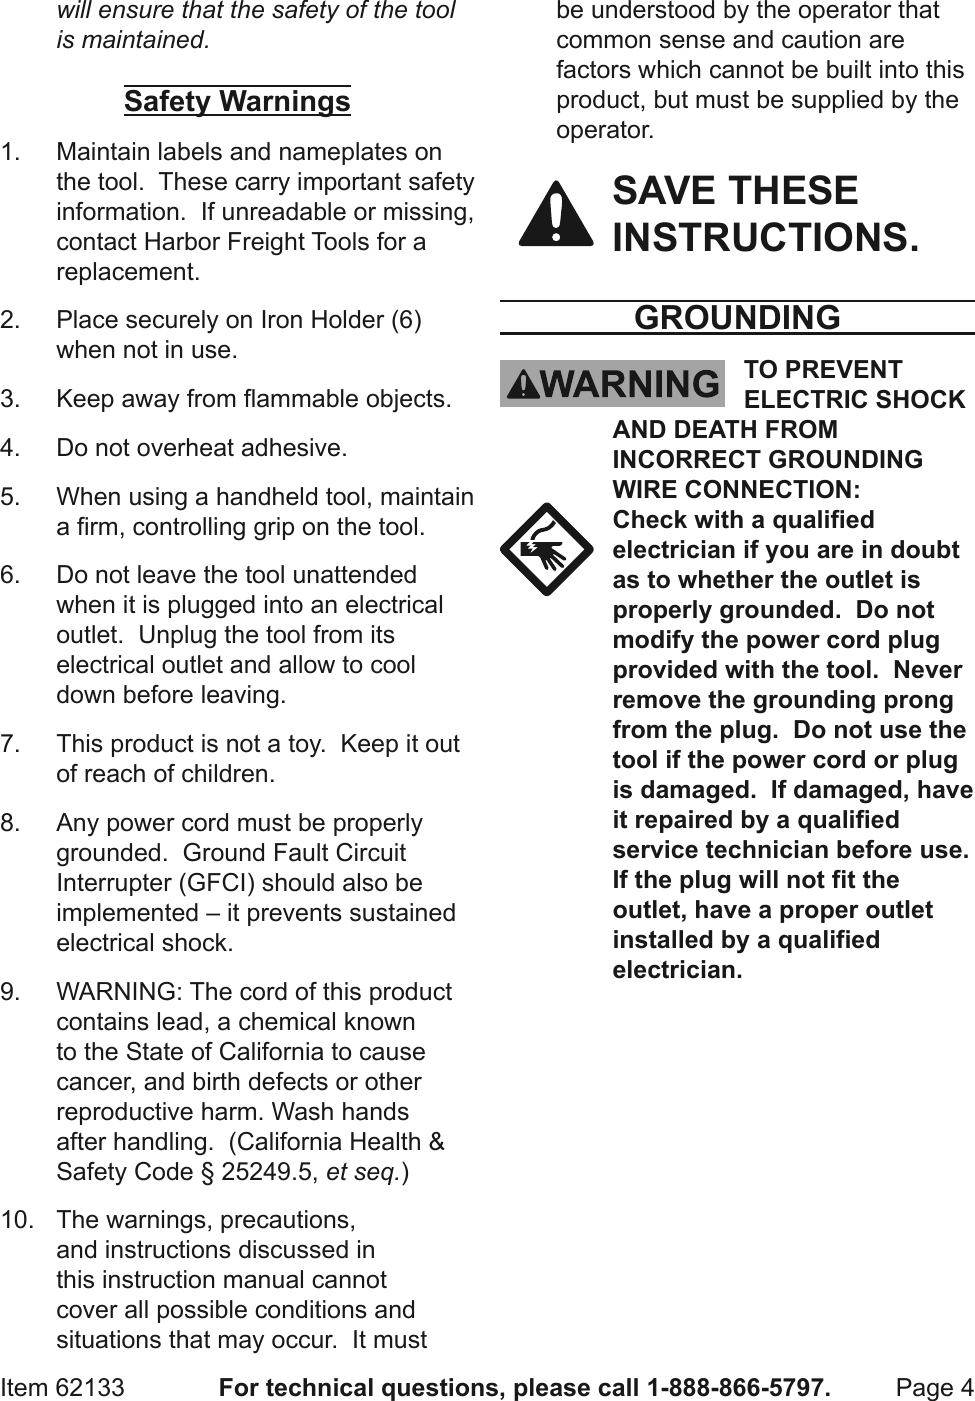 Page 4 of 12 - Harbor-Freight Harbor-Freight-Heat-Bond-Carpet-Seaming-Iron-Product-Manual-  Harbor-freight-heat-bond-carpet-seaming-iron-product-manual